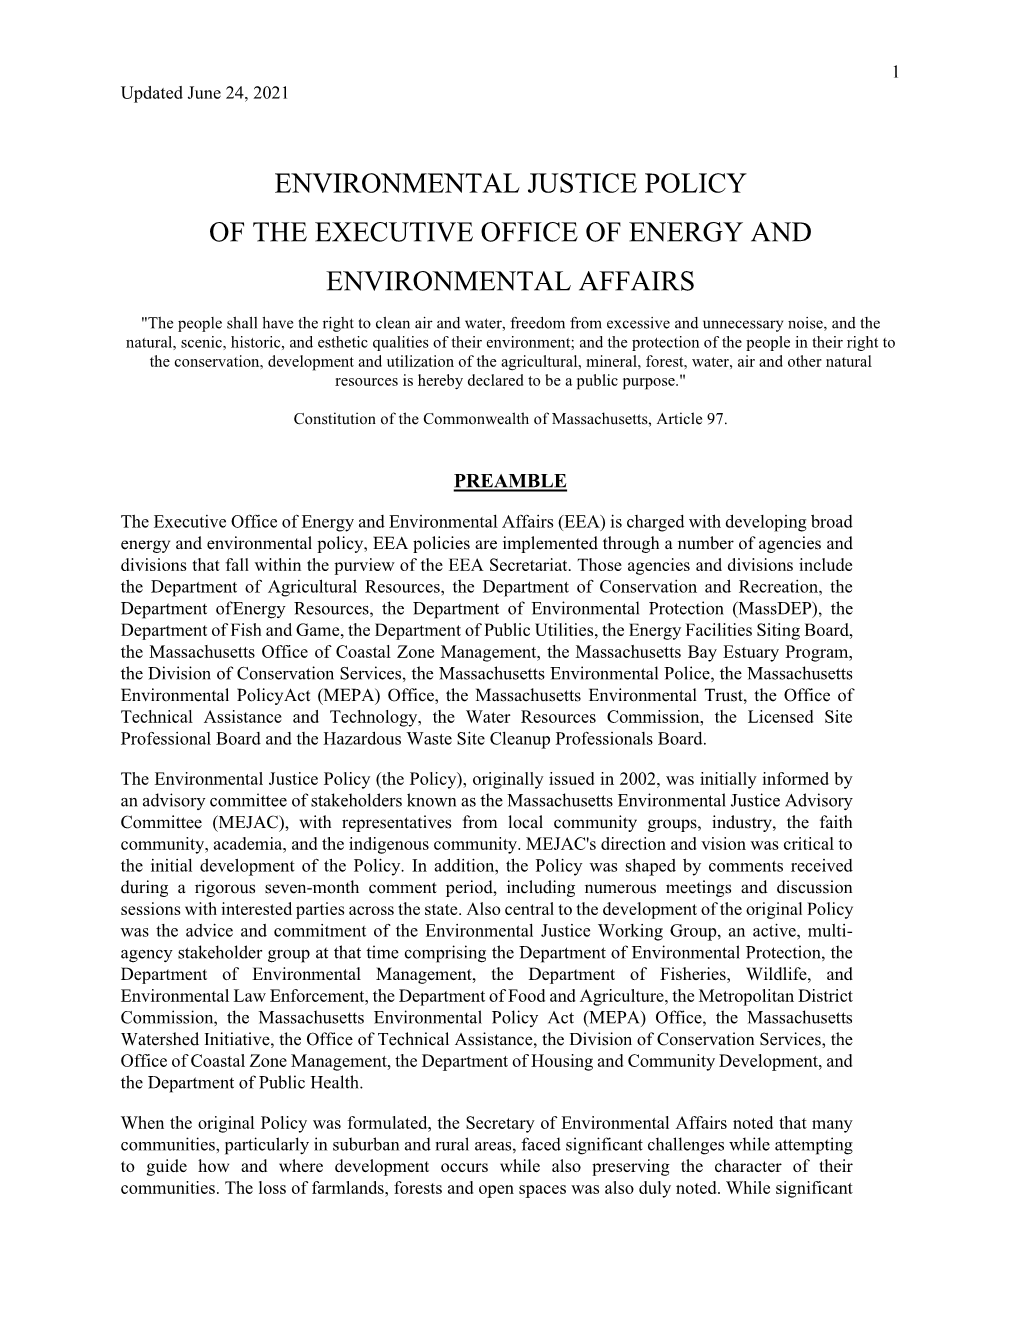 Environmental Justice Policy of the Executive Office of Energy and Environmental Affairs